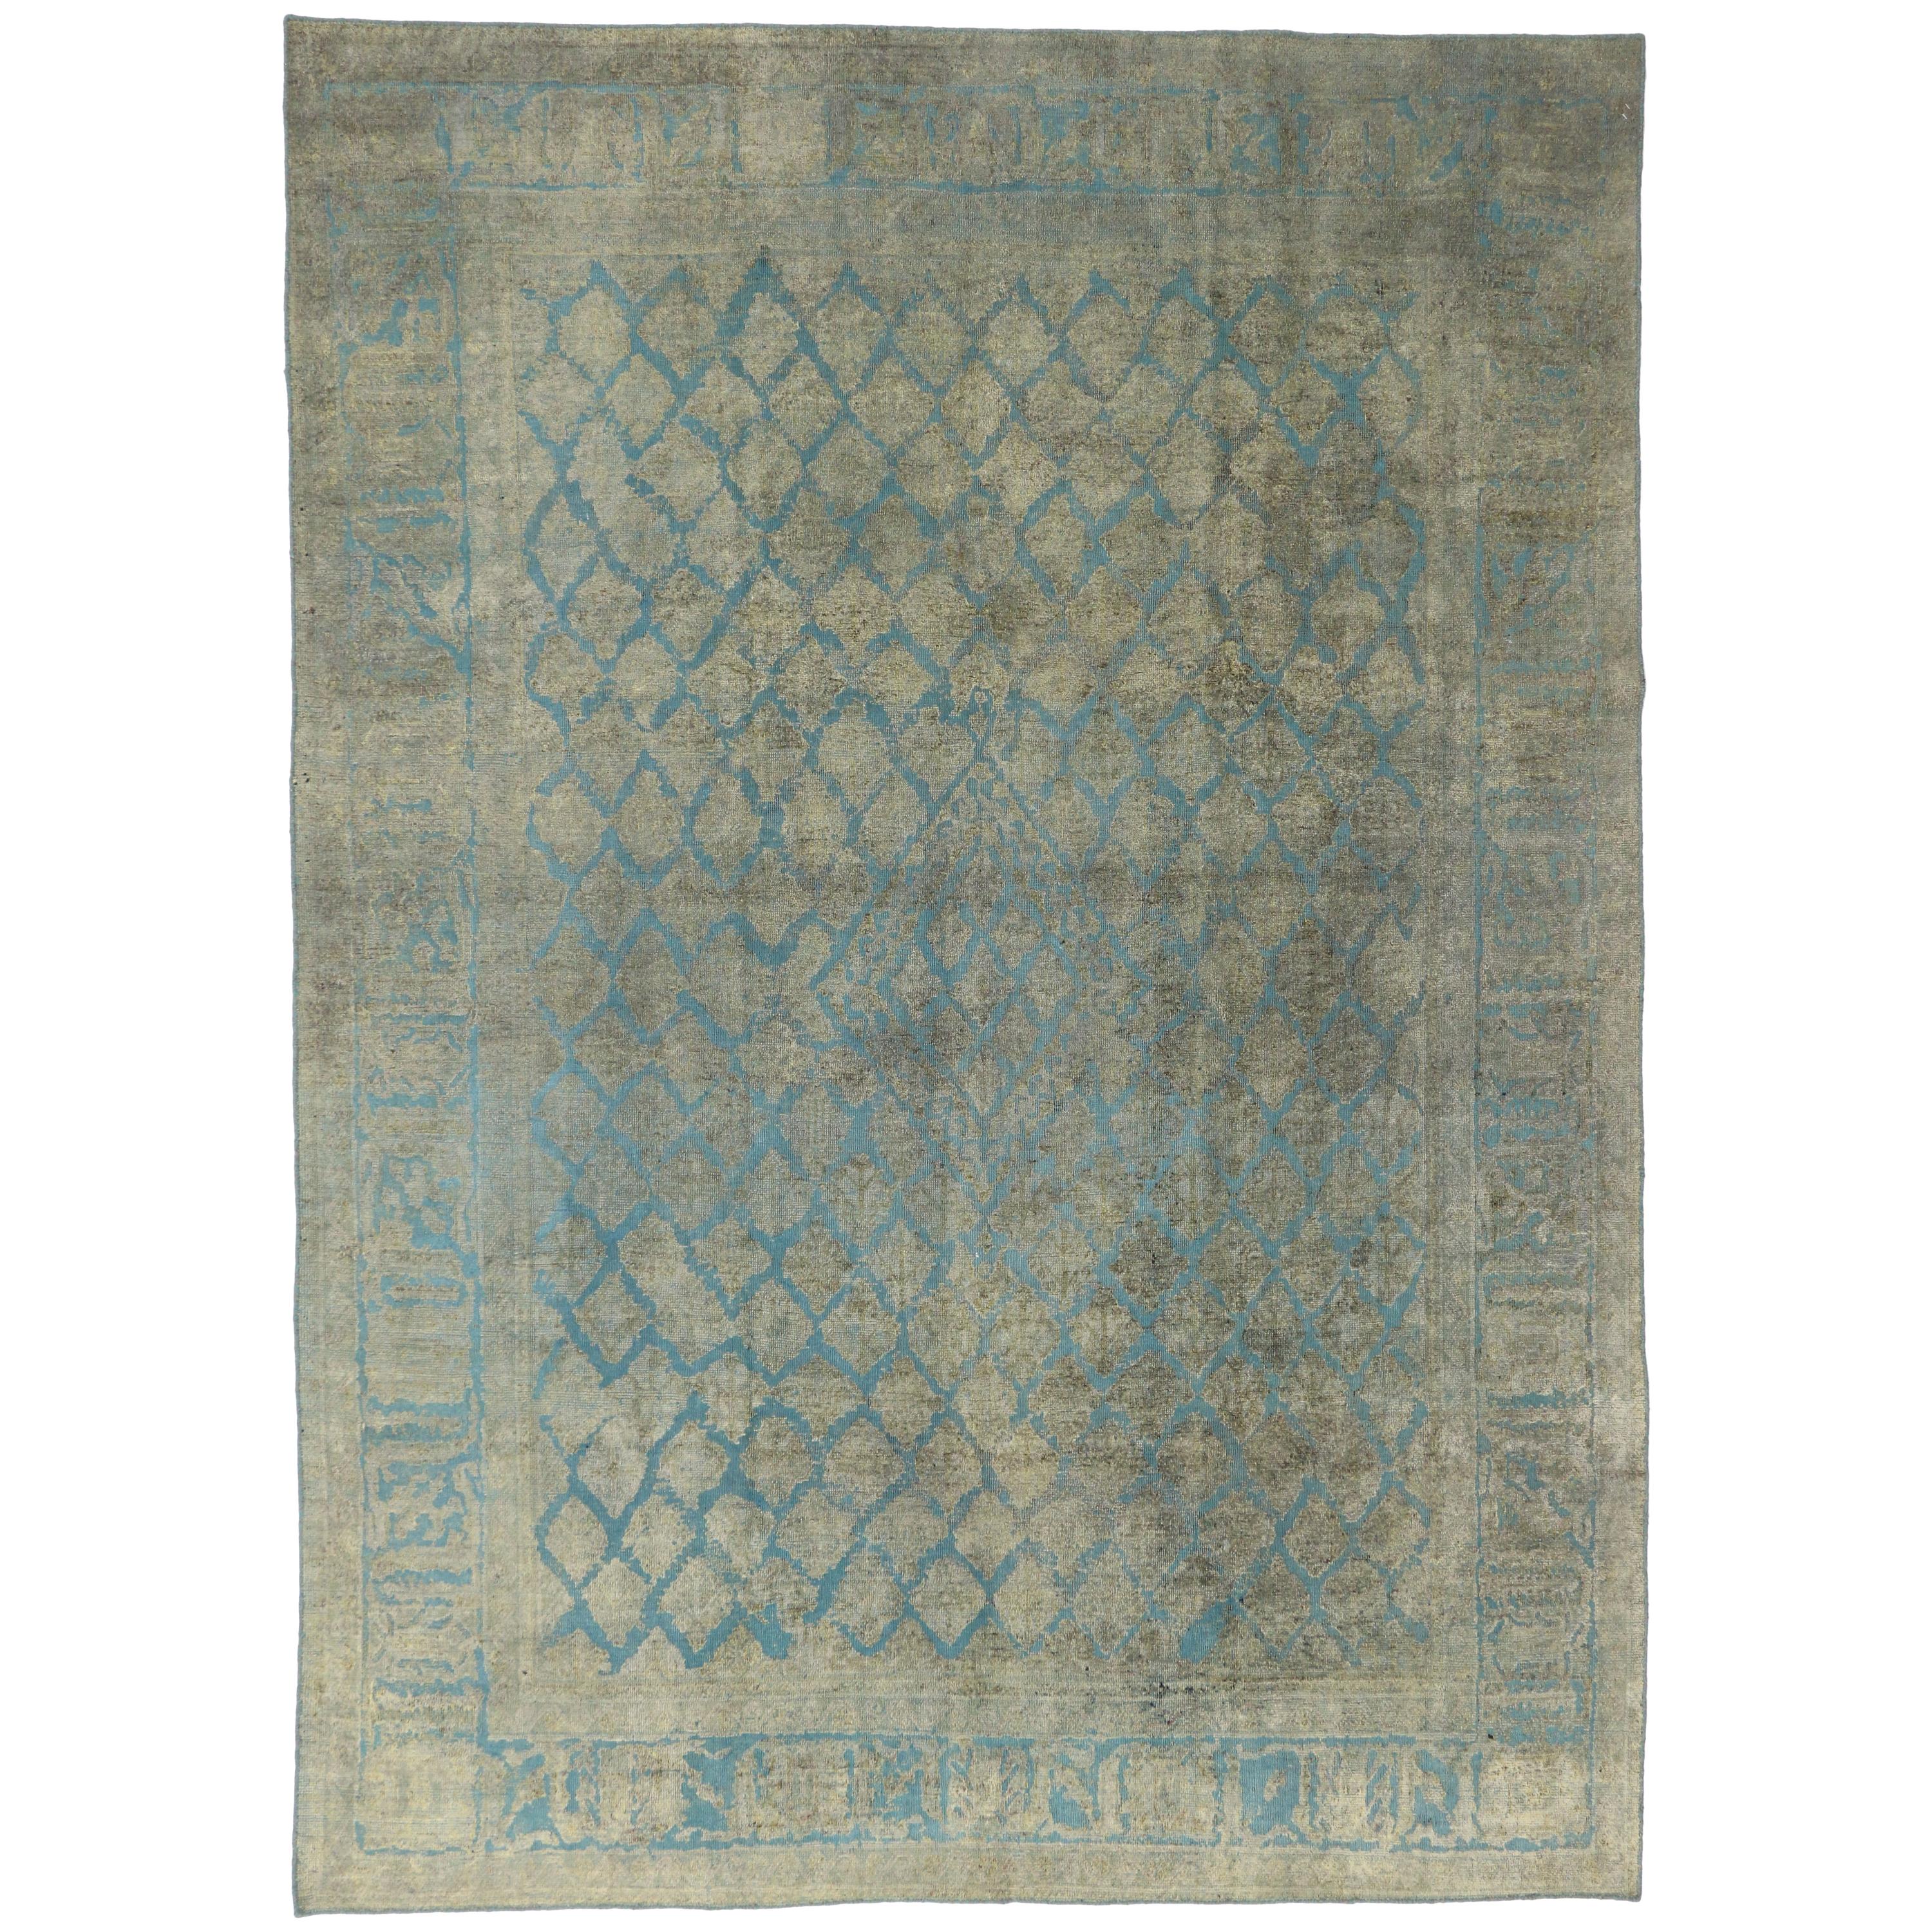 Vintage Overdyed Turkish Rug, Industrial Chic Meets Biophilic Elegance For Sale